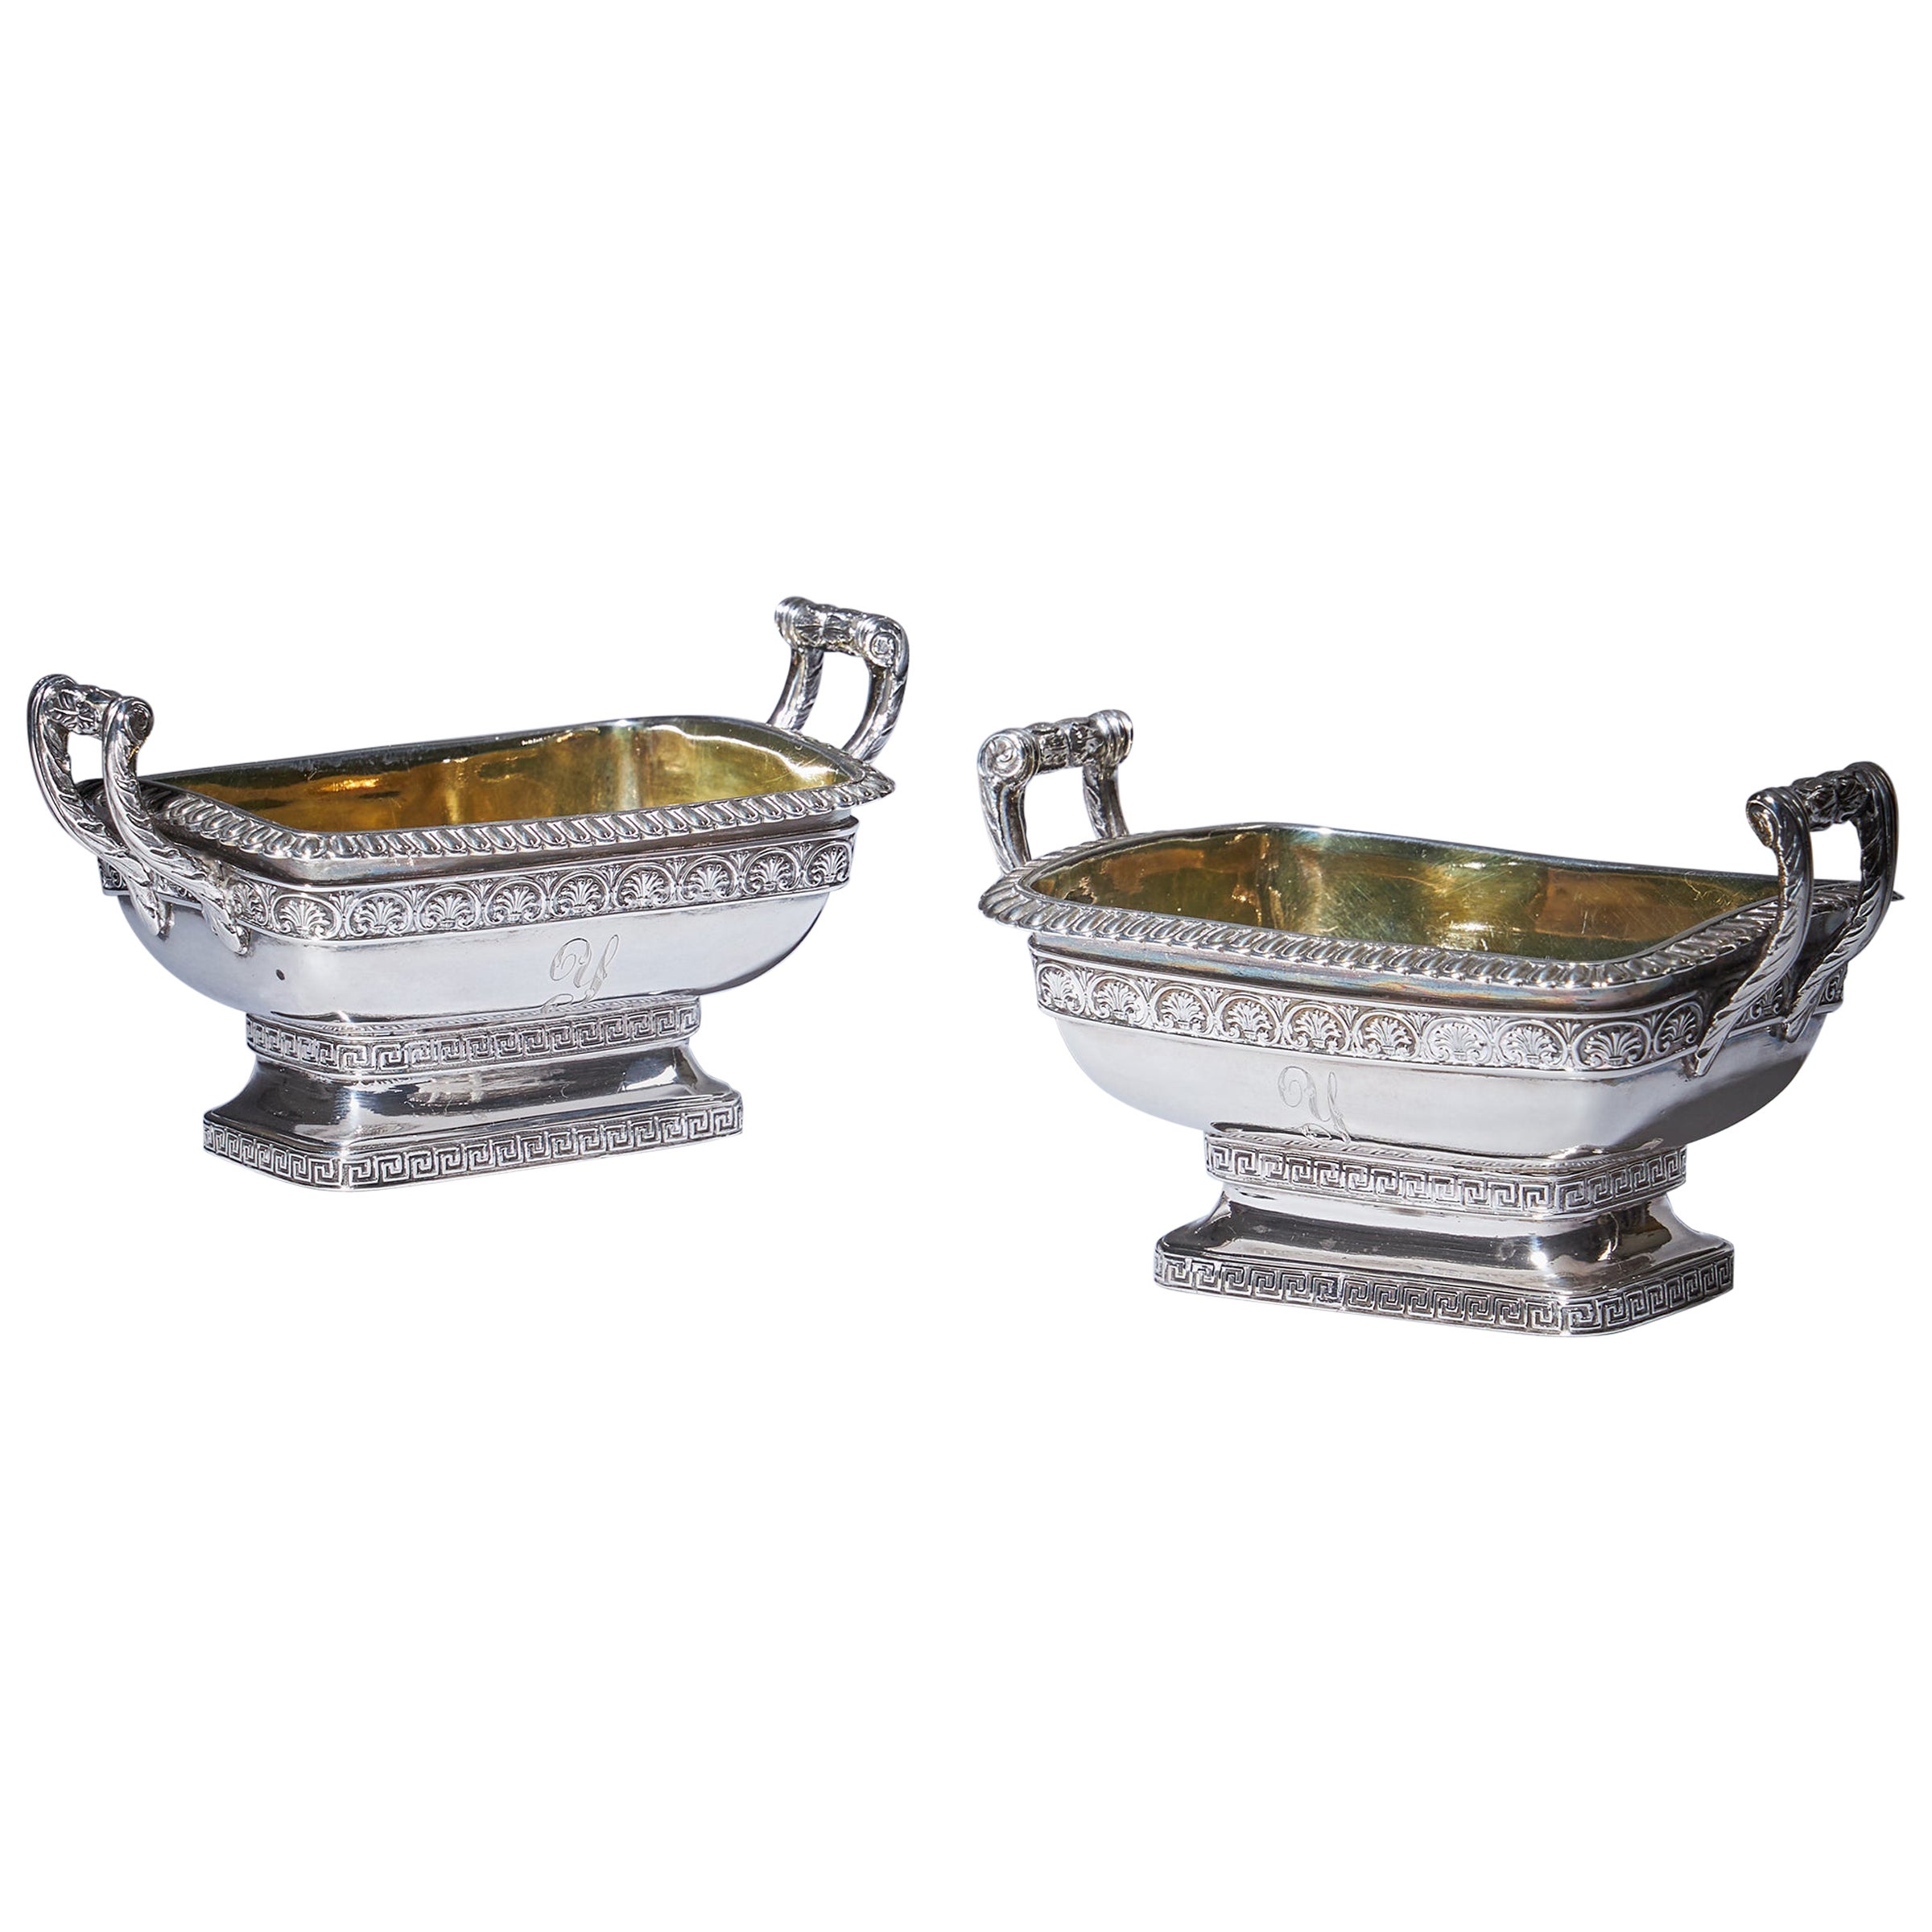 Fine Pair of George III Grand Tour Influenced Silver-Gilt Salts by William For Sale